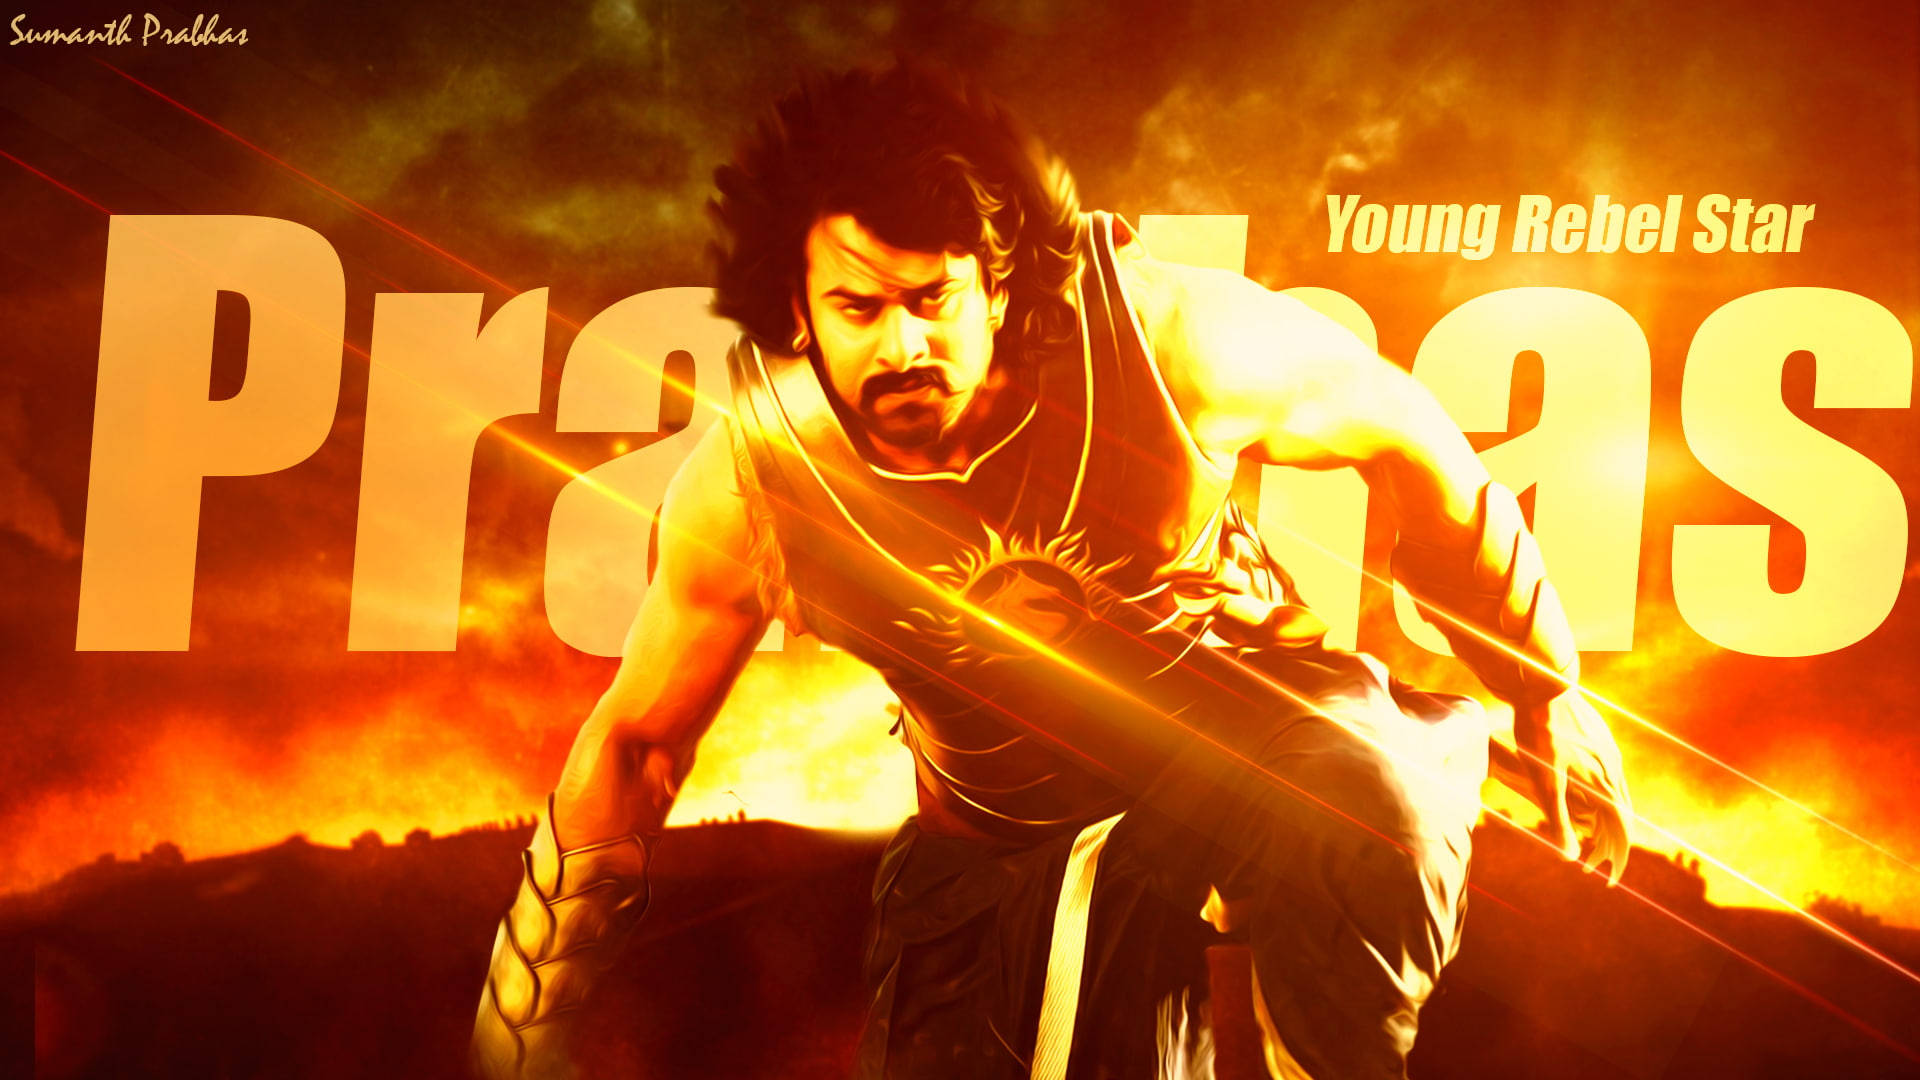 Prabhas Young Rebel Star Background